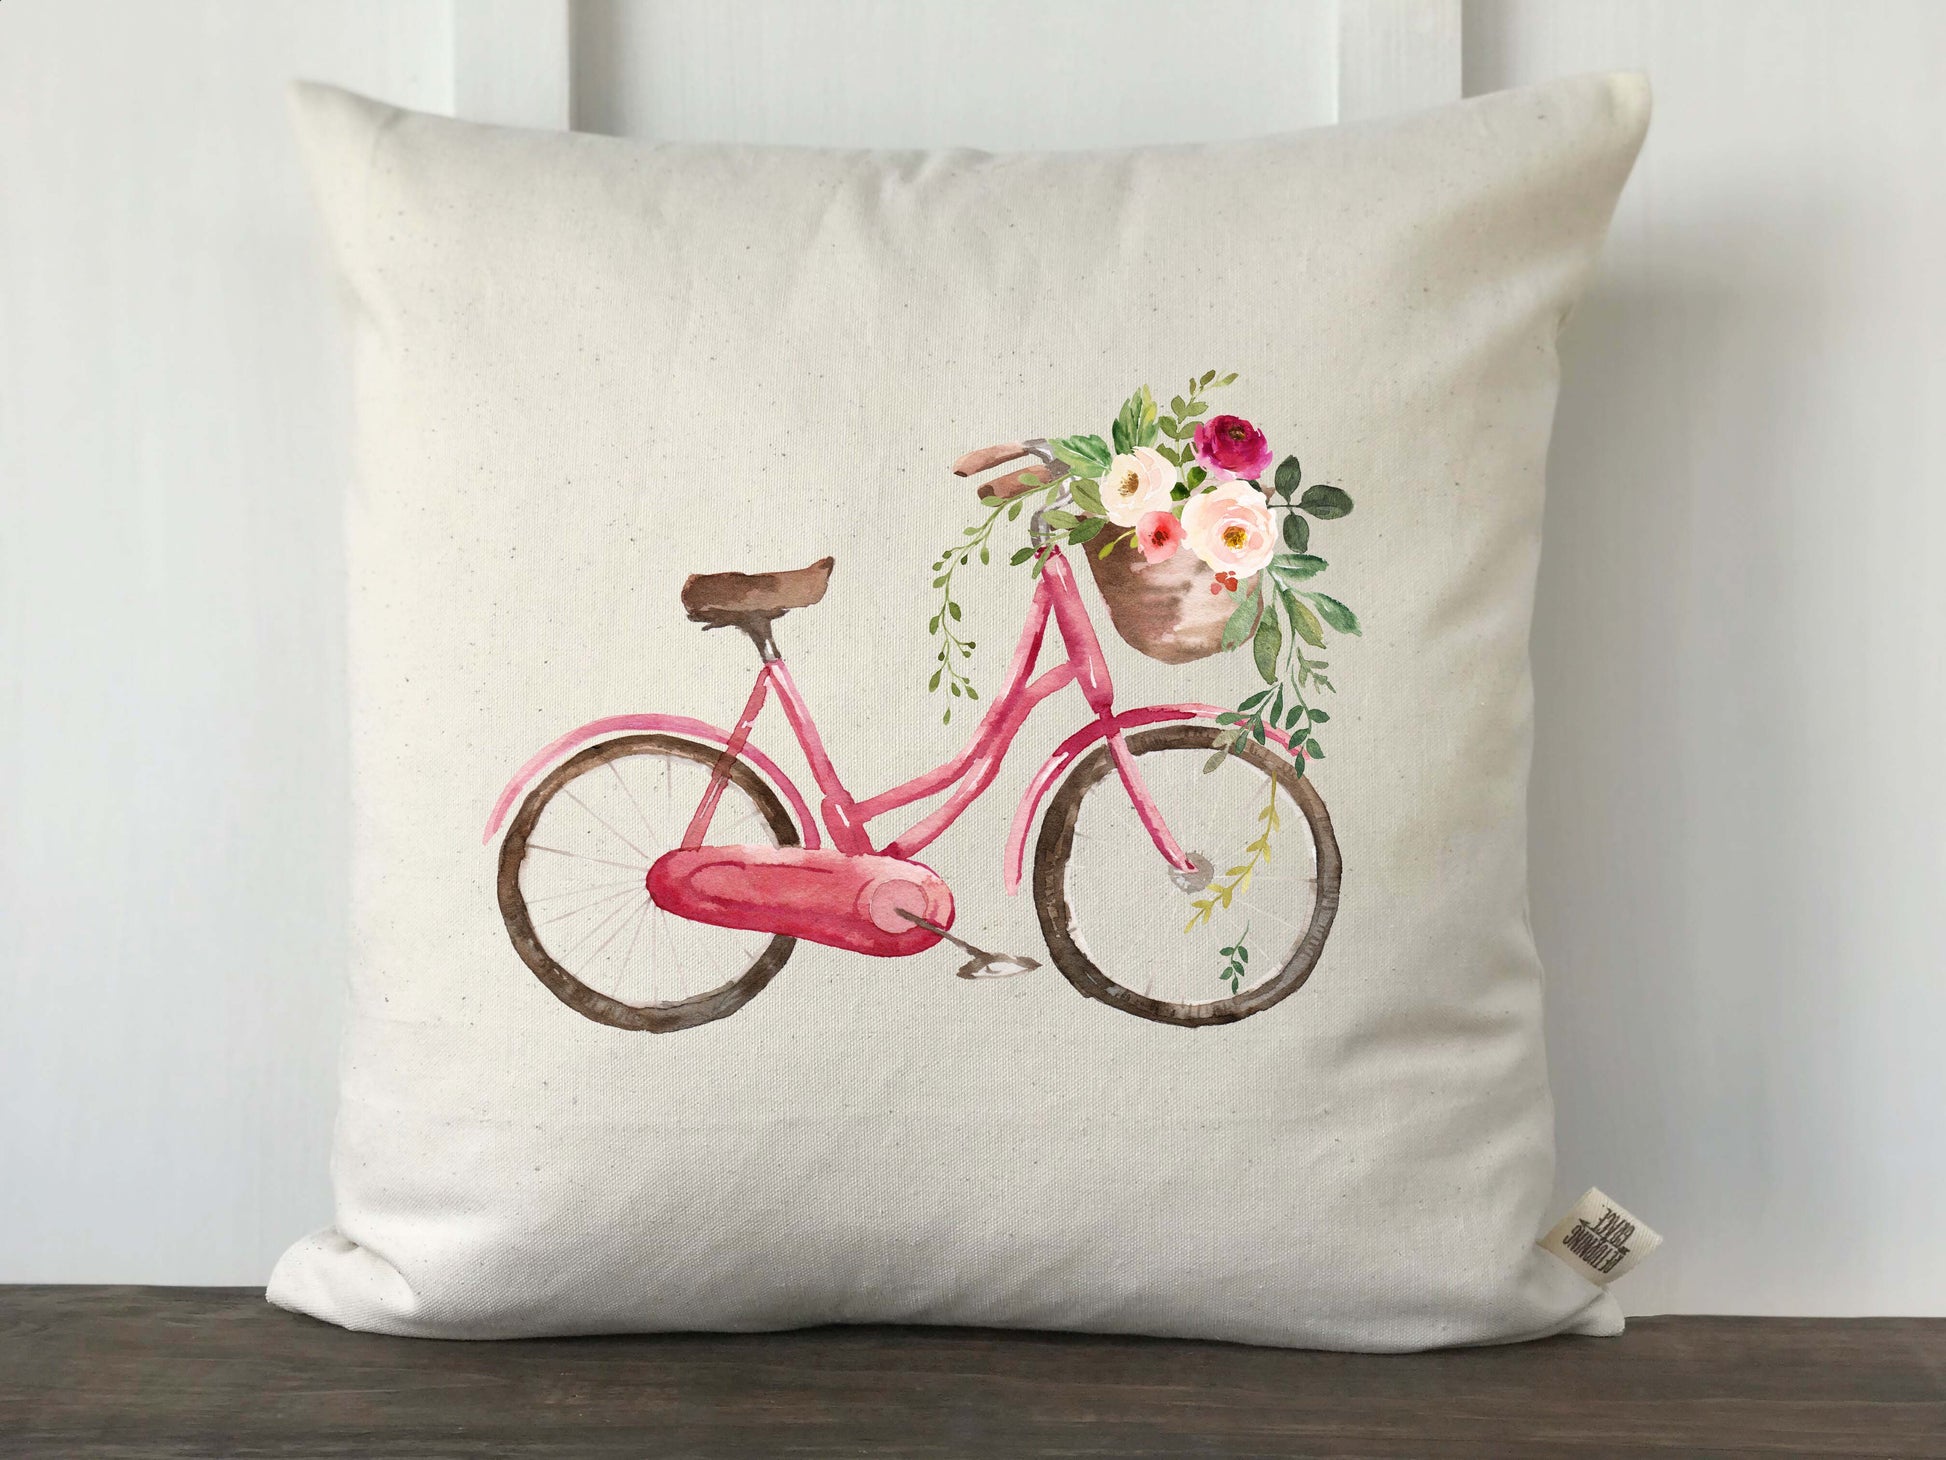 Watercolor Bicycle with Flower Basket Pillow Cover - Returning Grace Designs